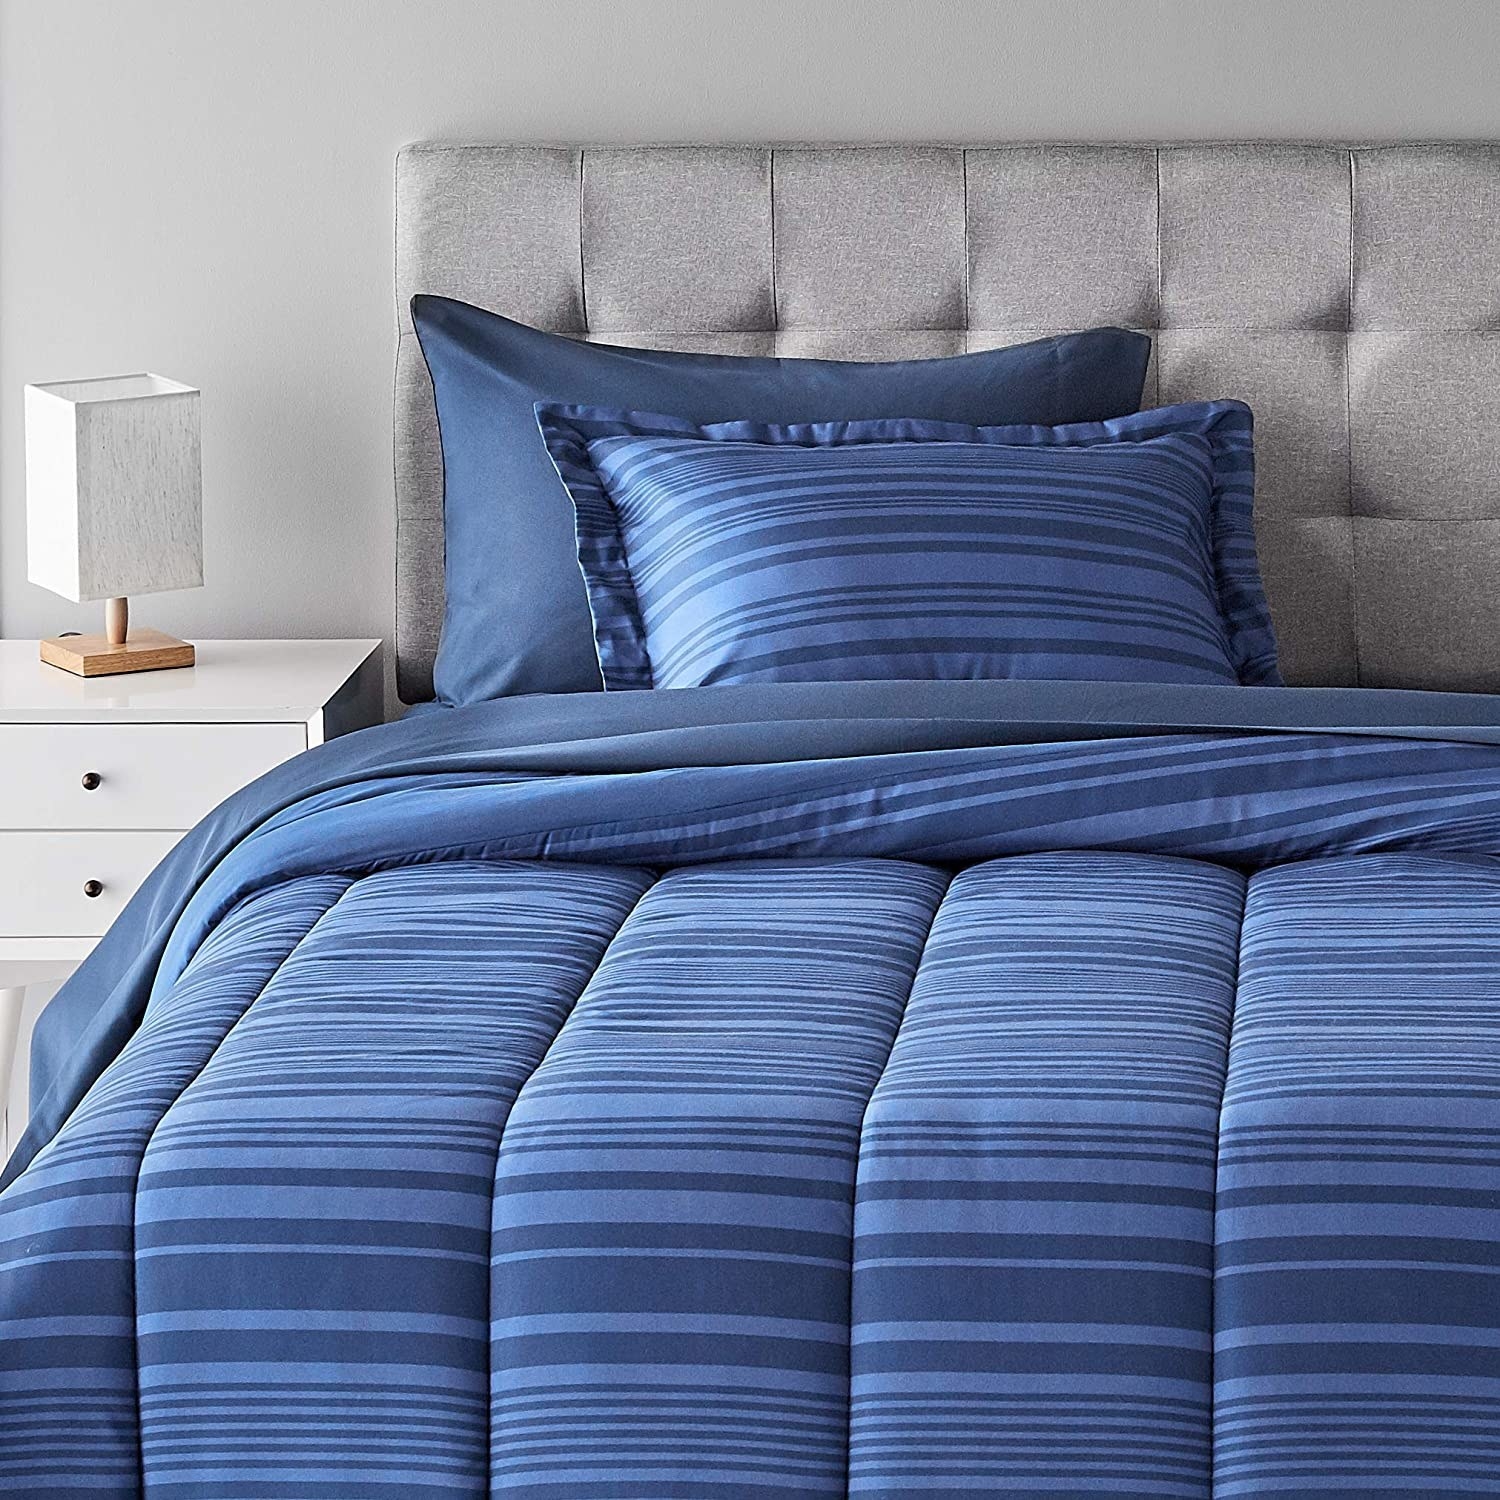 Blue striped comforter and pillowcases on a bed